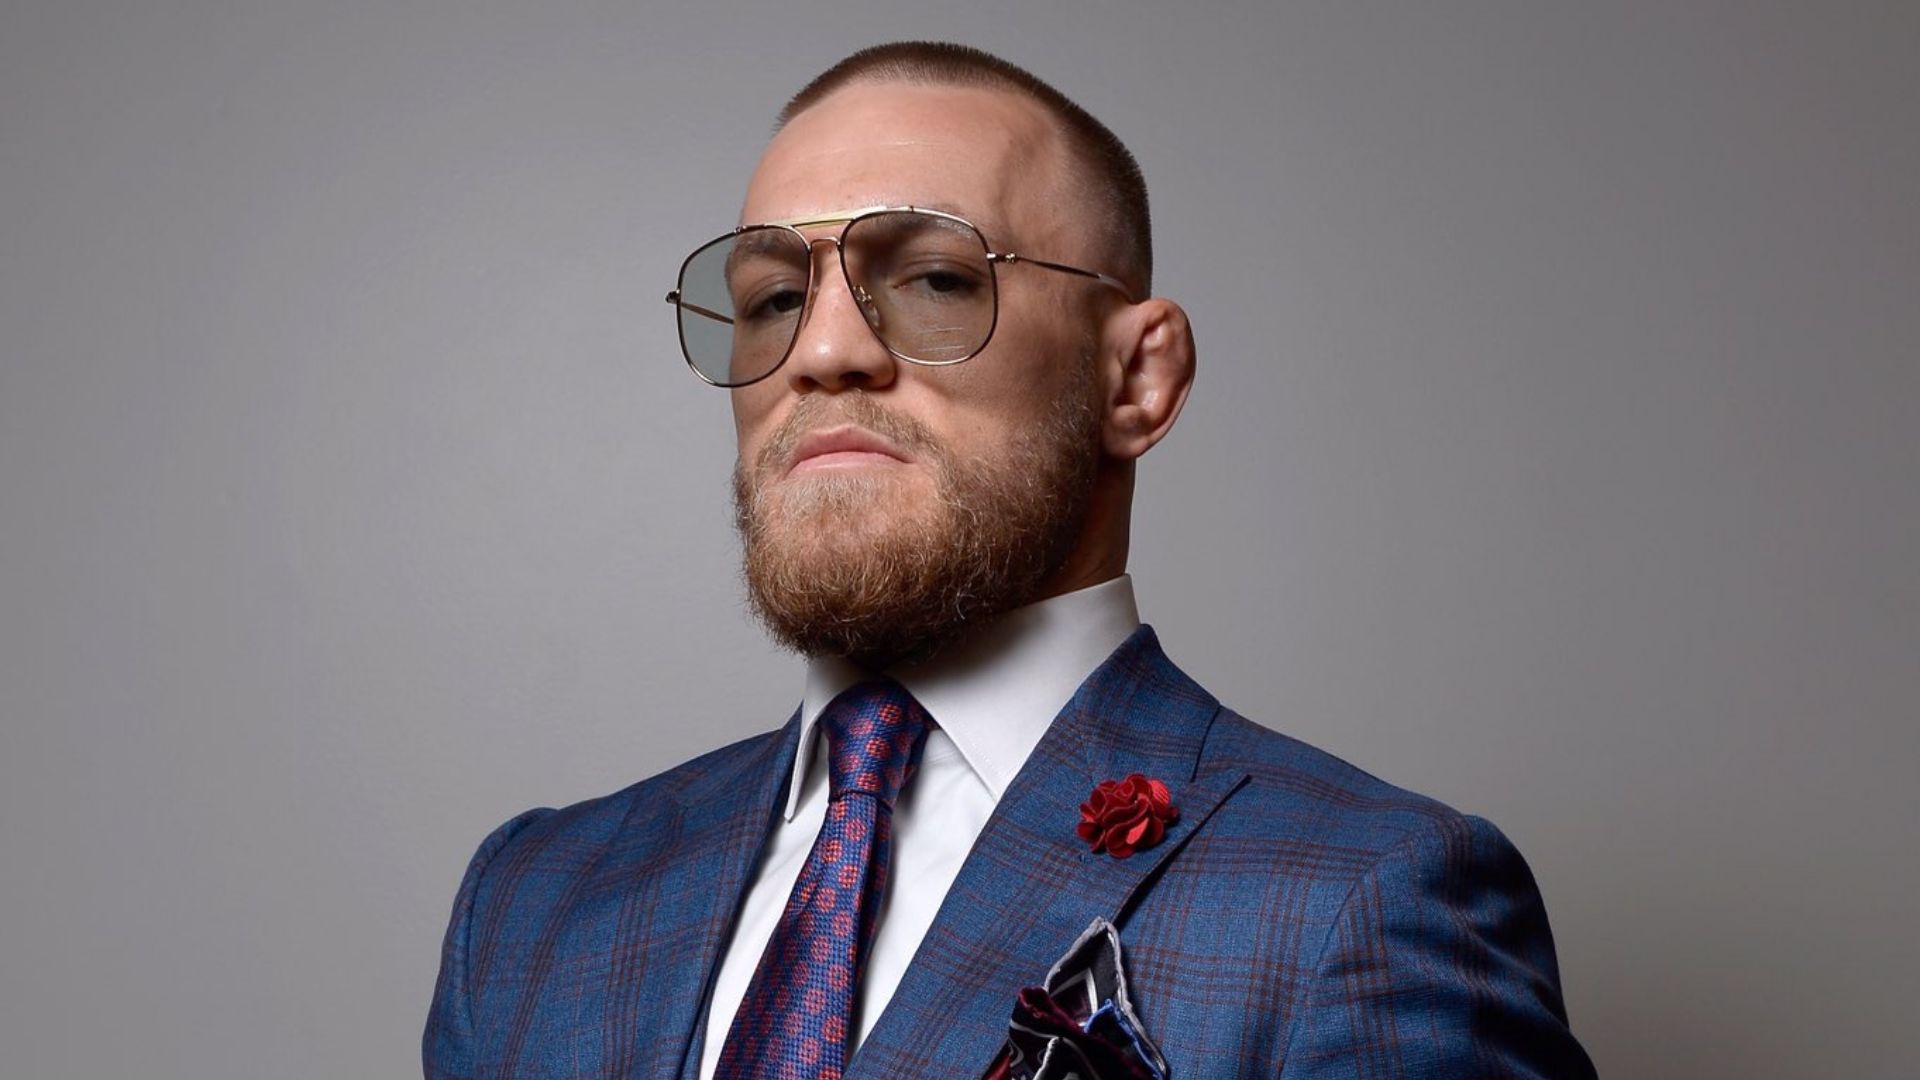 Conor McGregor’s tensions flare on the Ultimate Fighter